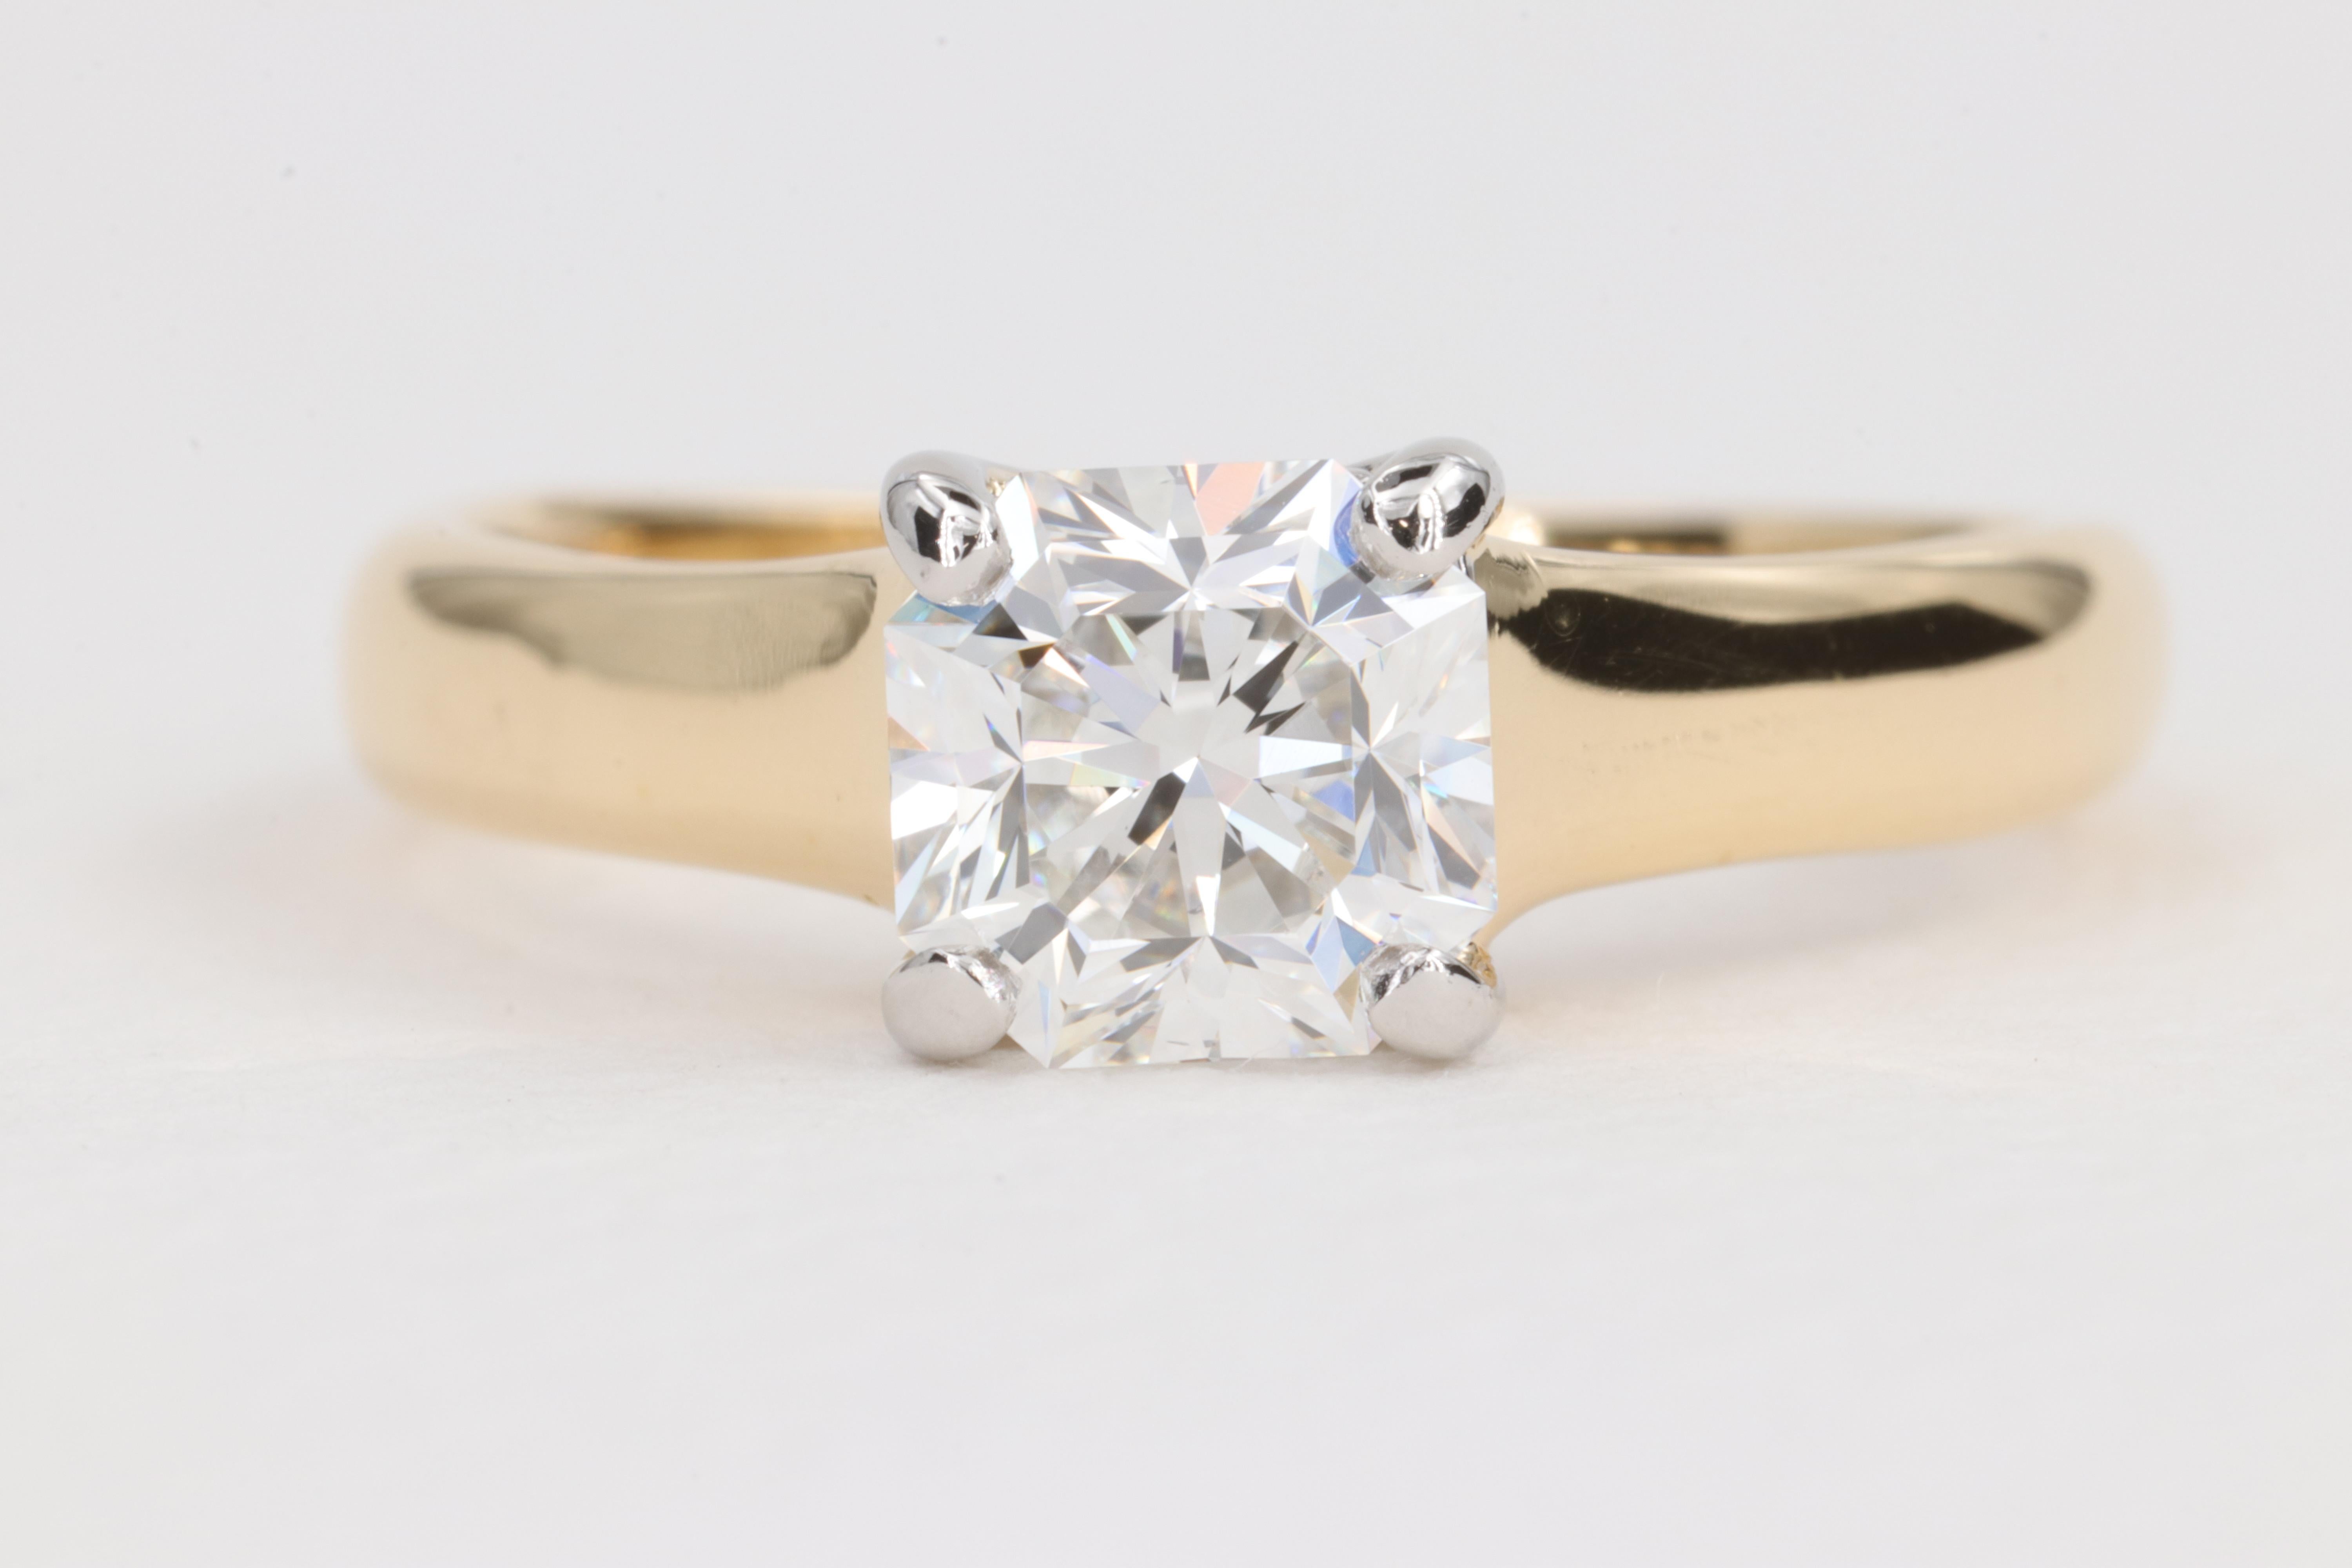 Tiffany & Co. 1.02ct Lucida Radiant Cut Diamond Two Tone 18 Karat Yellow Gold & Platinum Engagement Ring

This classic Tiffany & Co. solitaire diamond engagement ring features a colorless 1.02 carat Lucida cut diamond graded F in color and VVS2